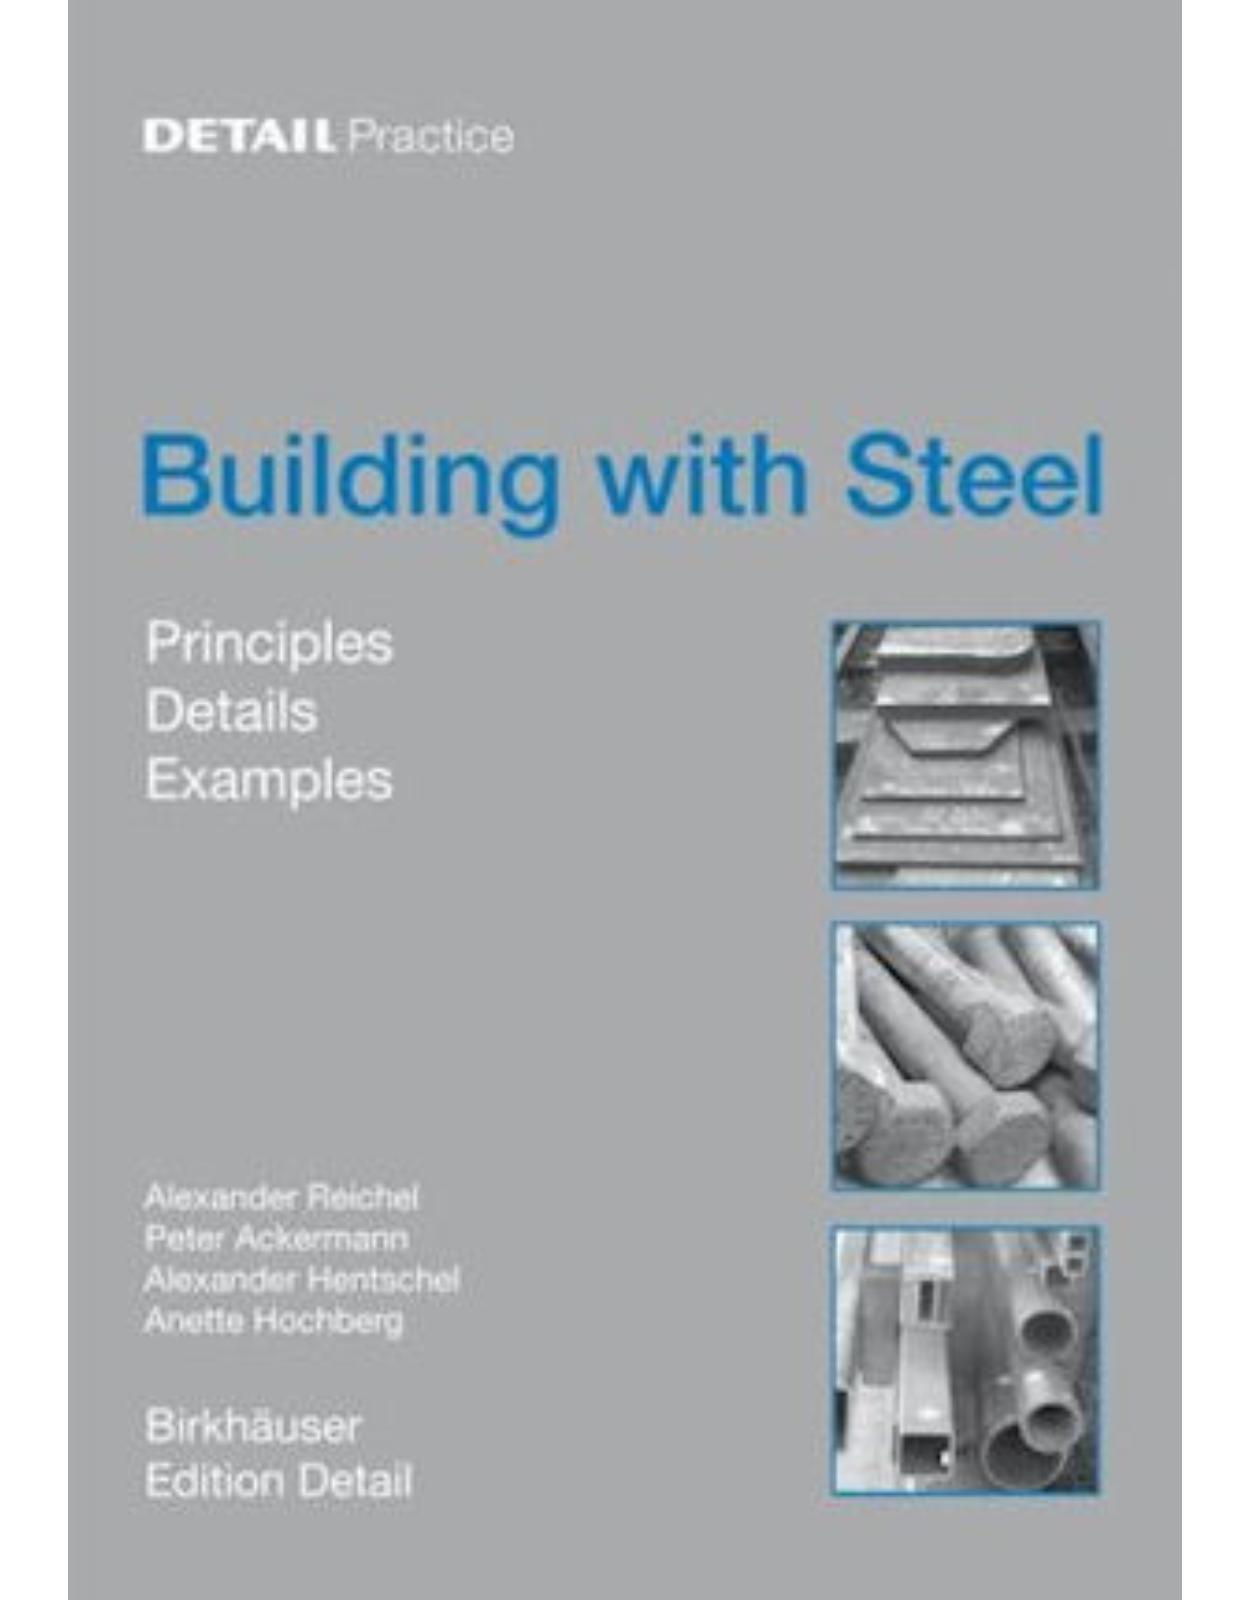 Building with Steel. Principles, Details, Examples (Detail Practice